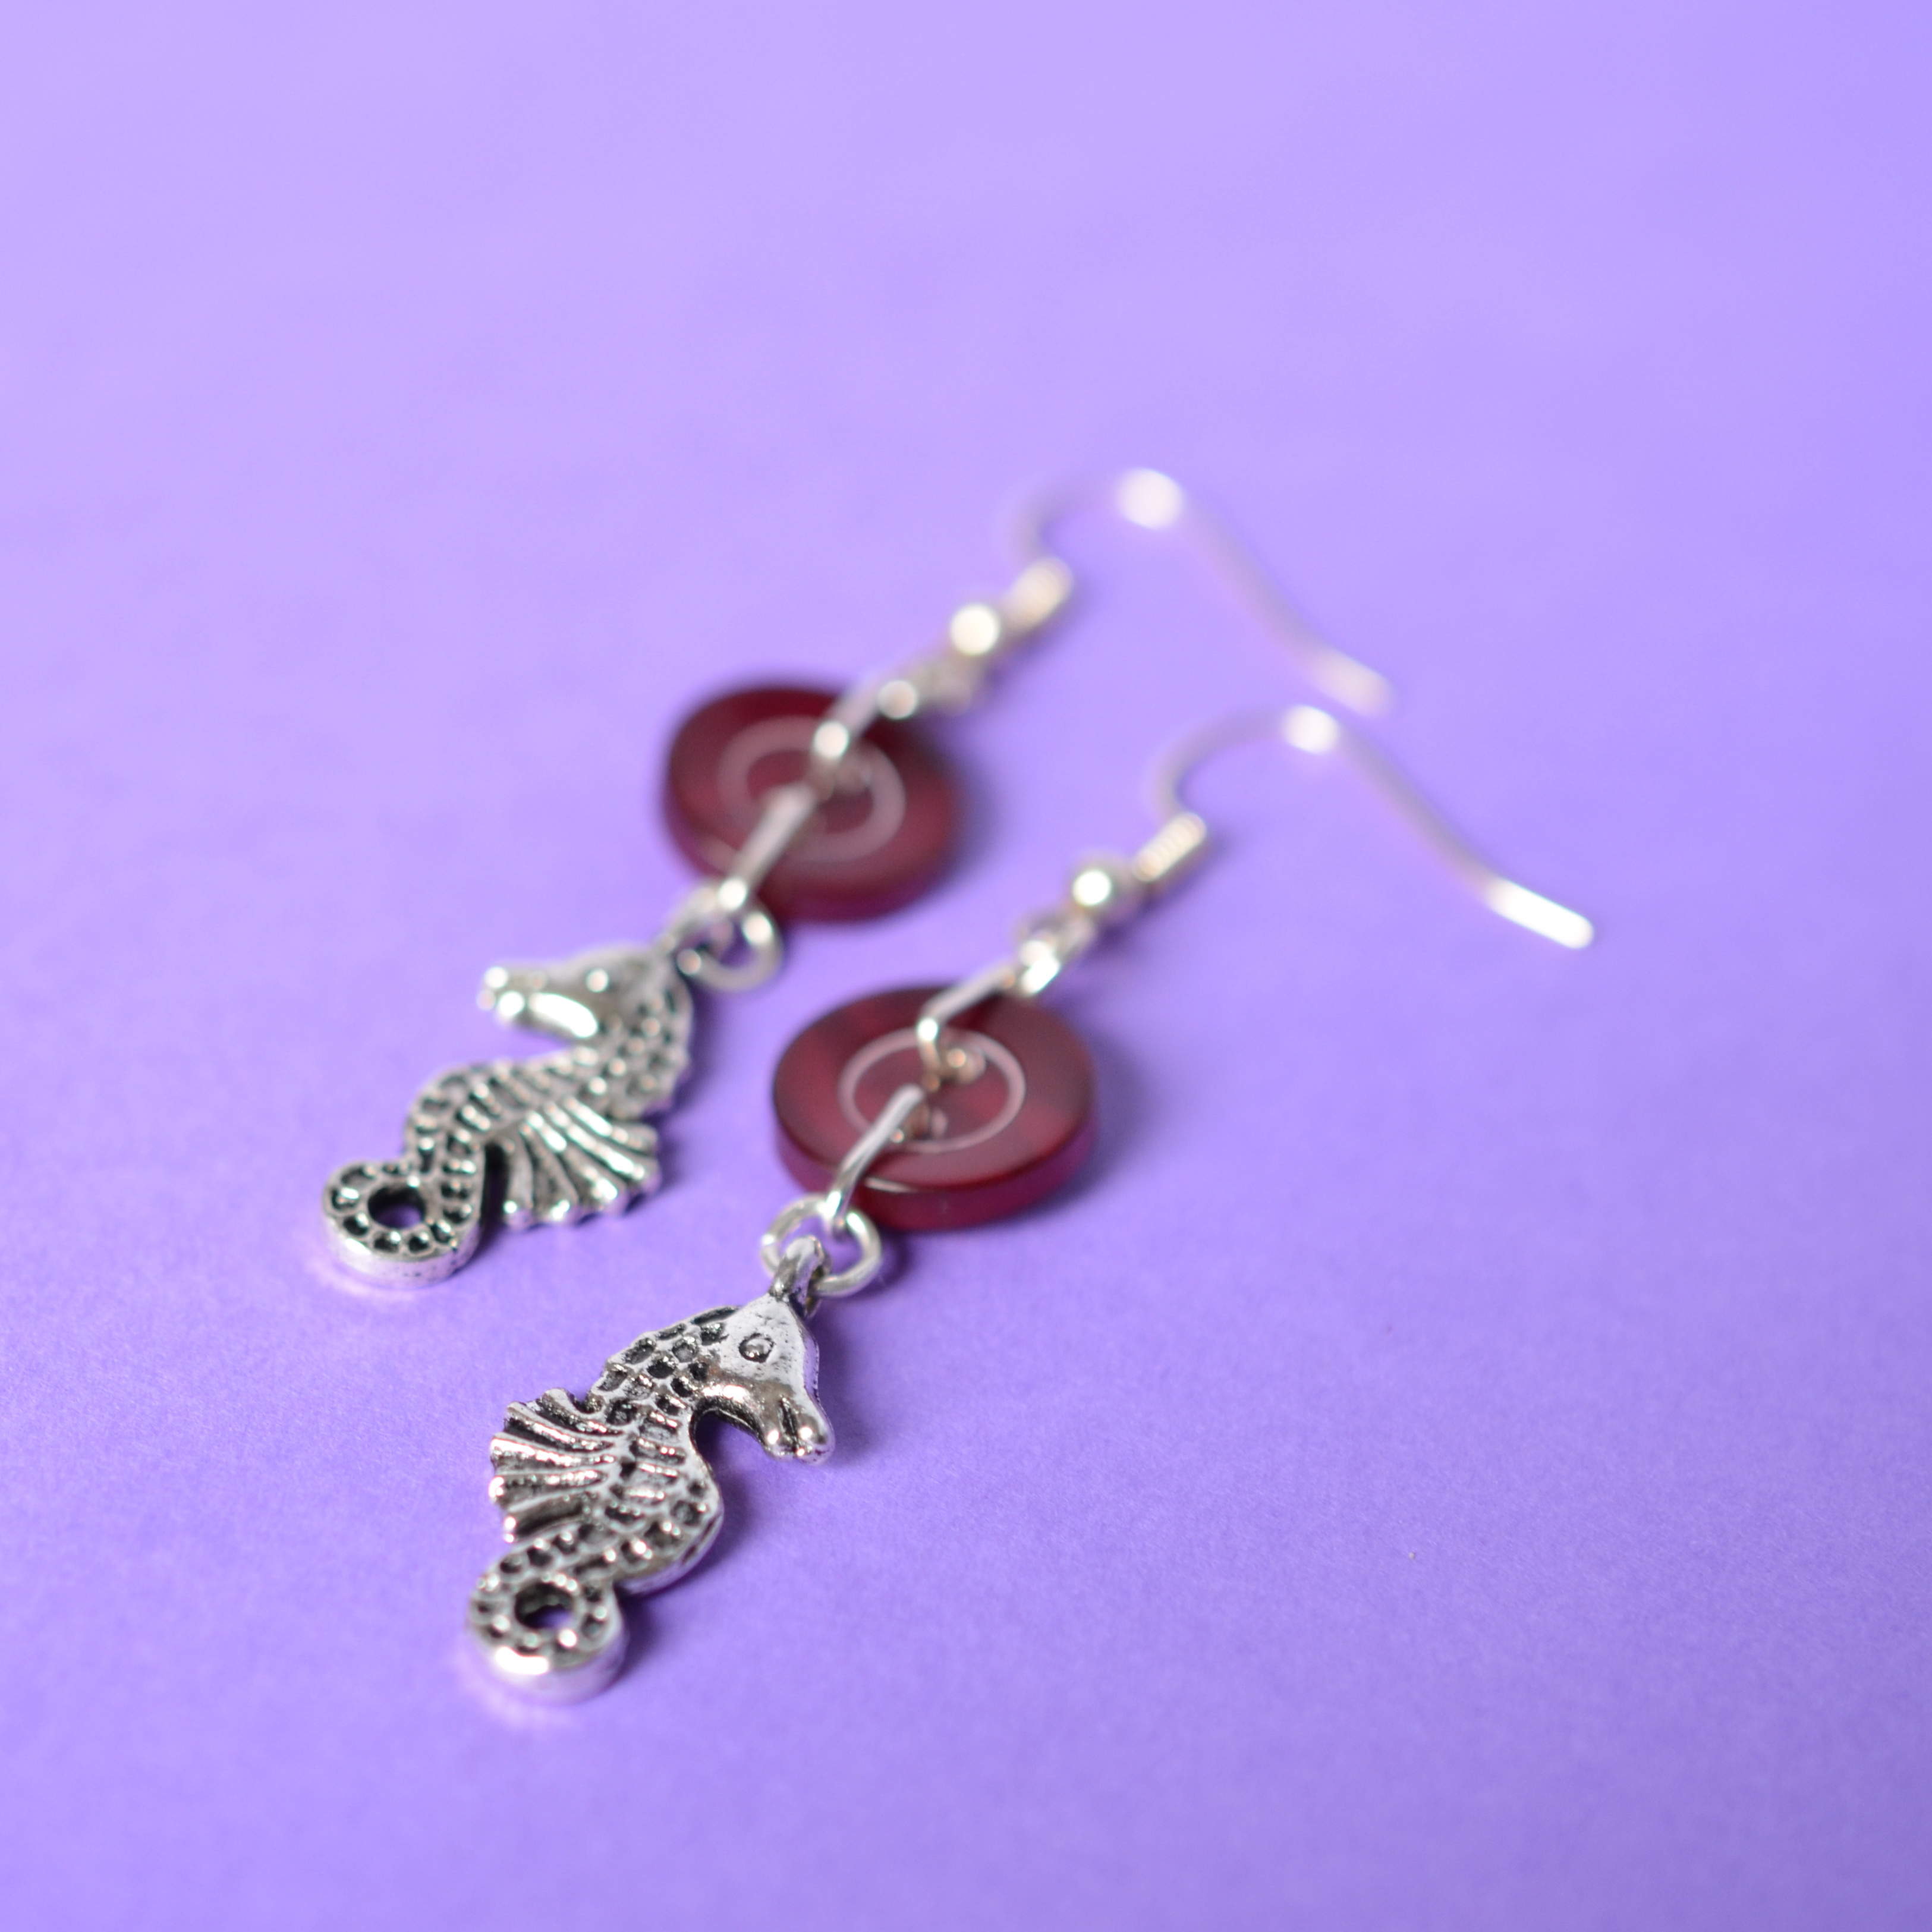 Seahorse One Button Charm Earrings